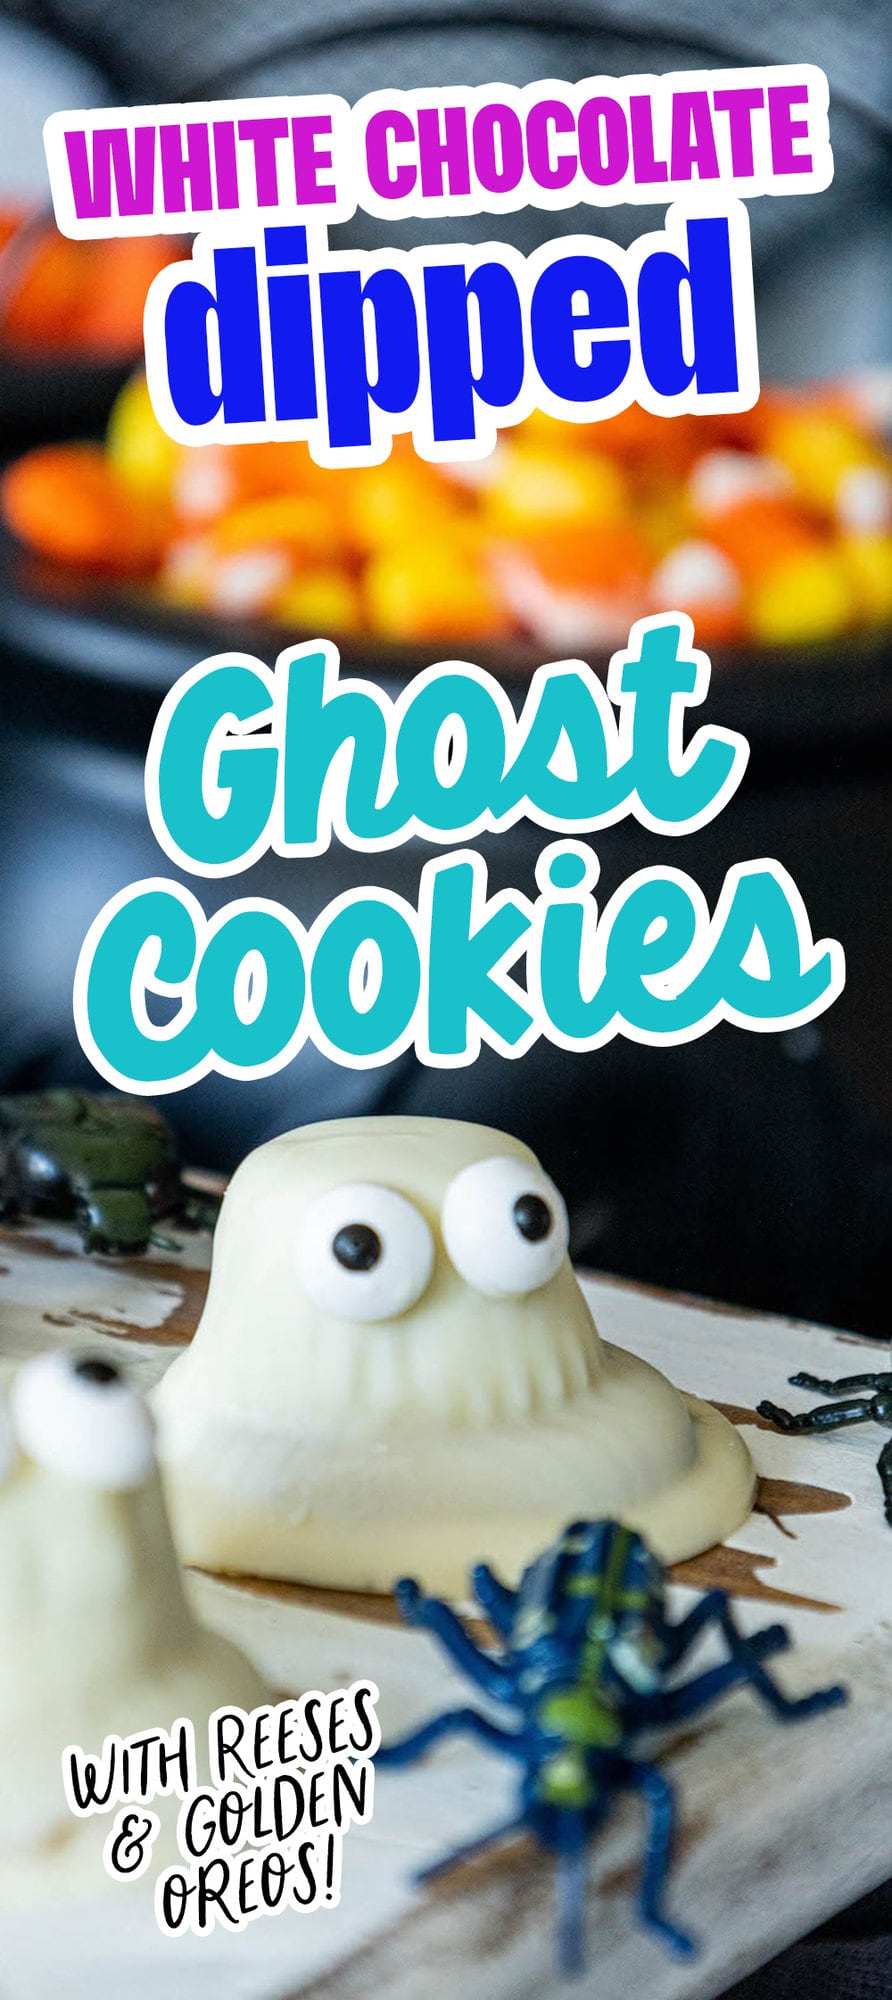 cookies dipped in white chocolate with candy eyes to look like ghosts